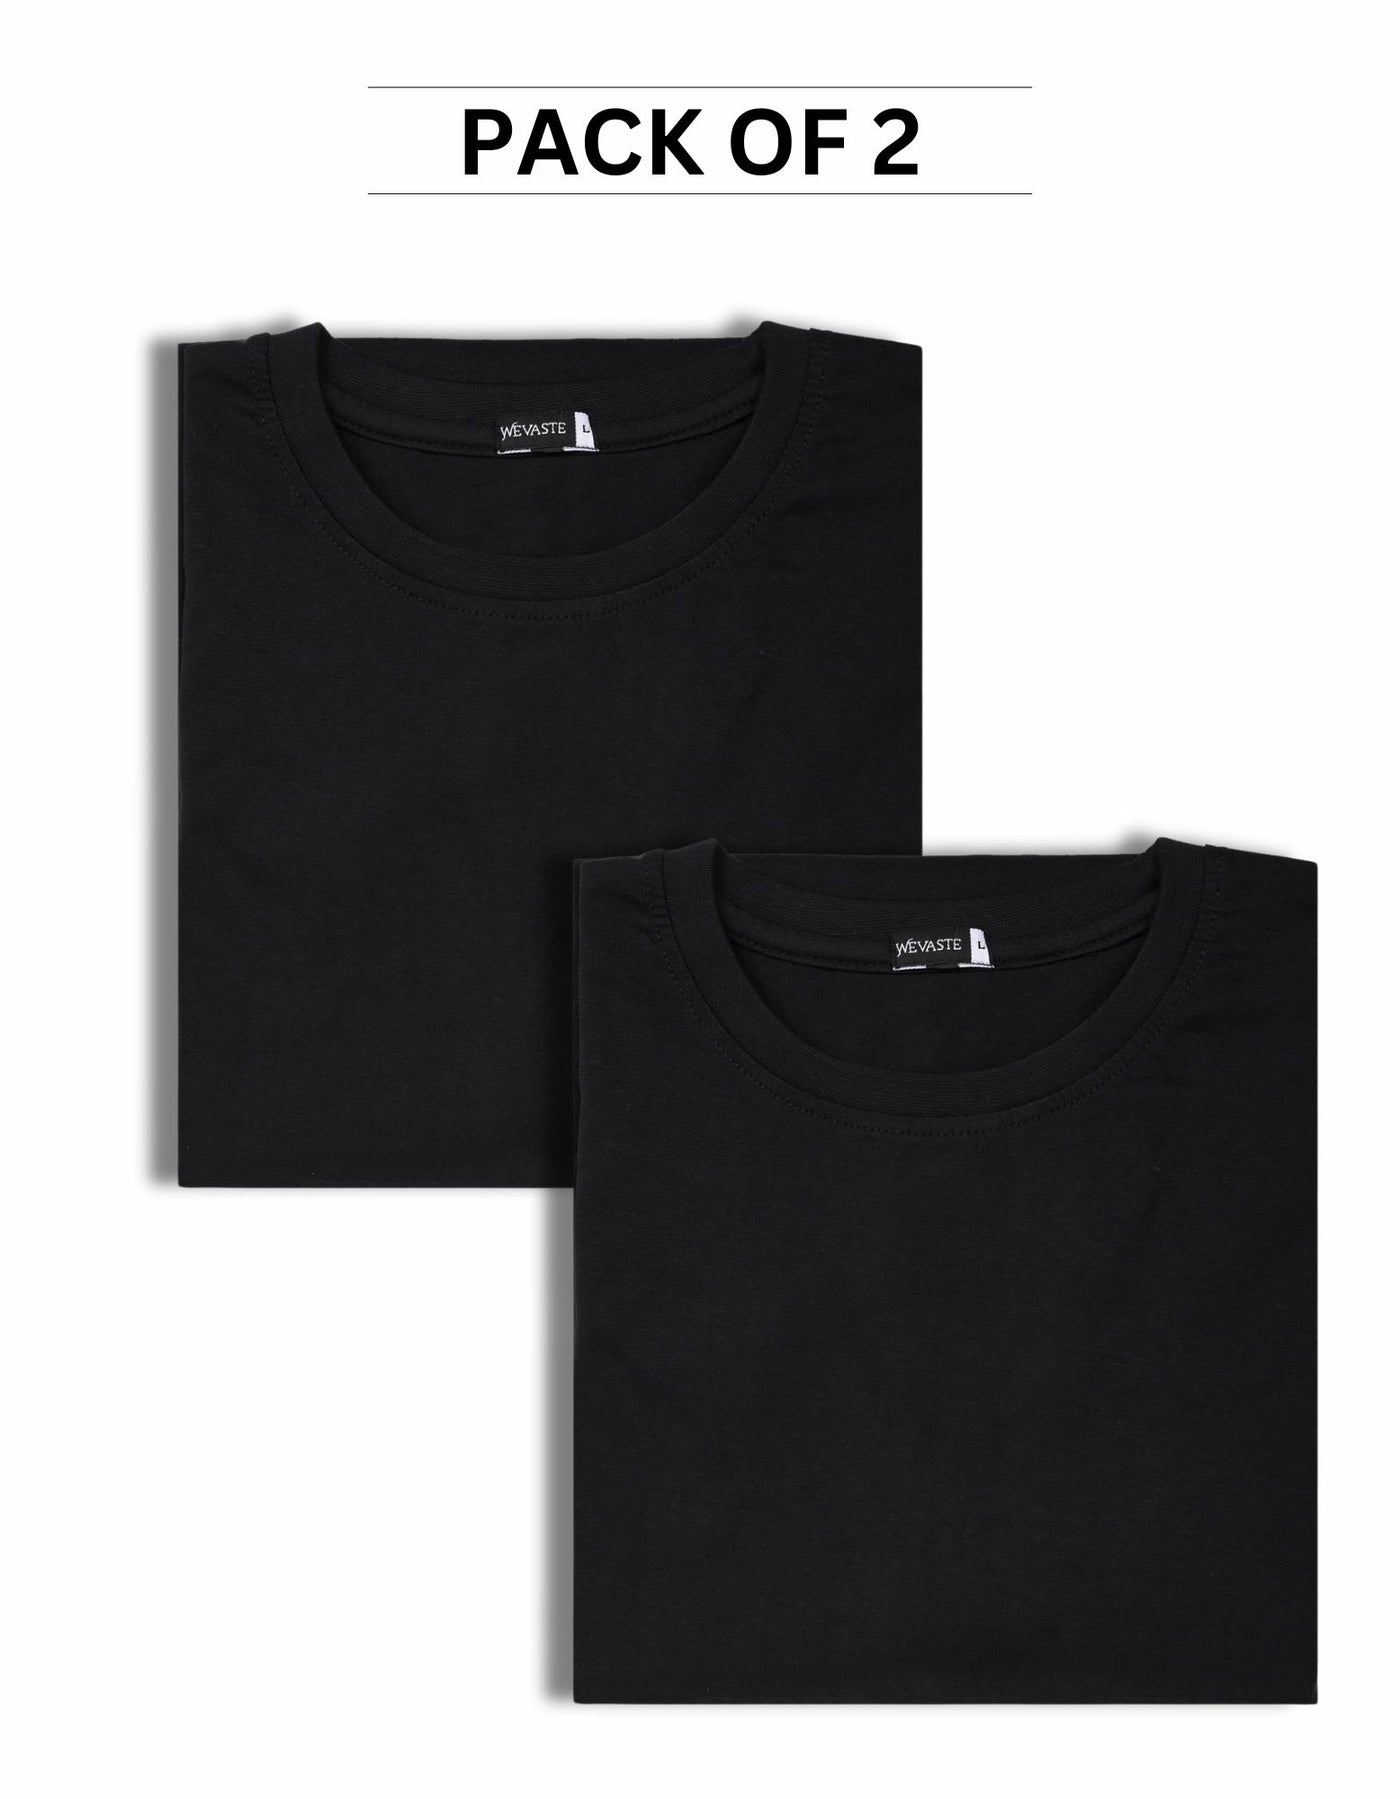 Black Pack Of 2 T-shirts